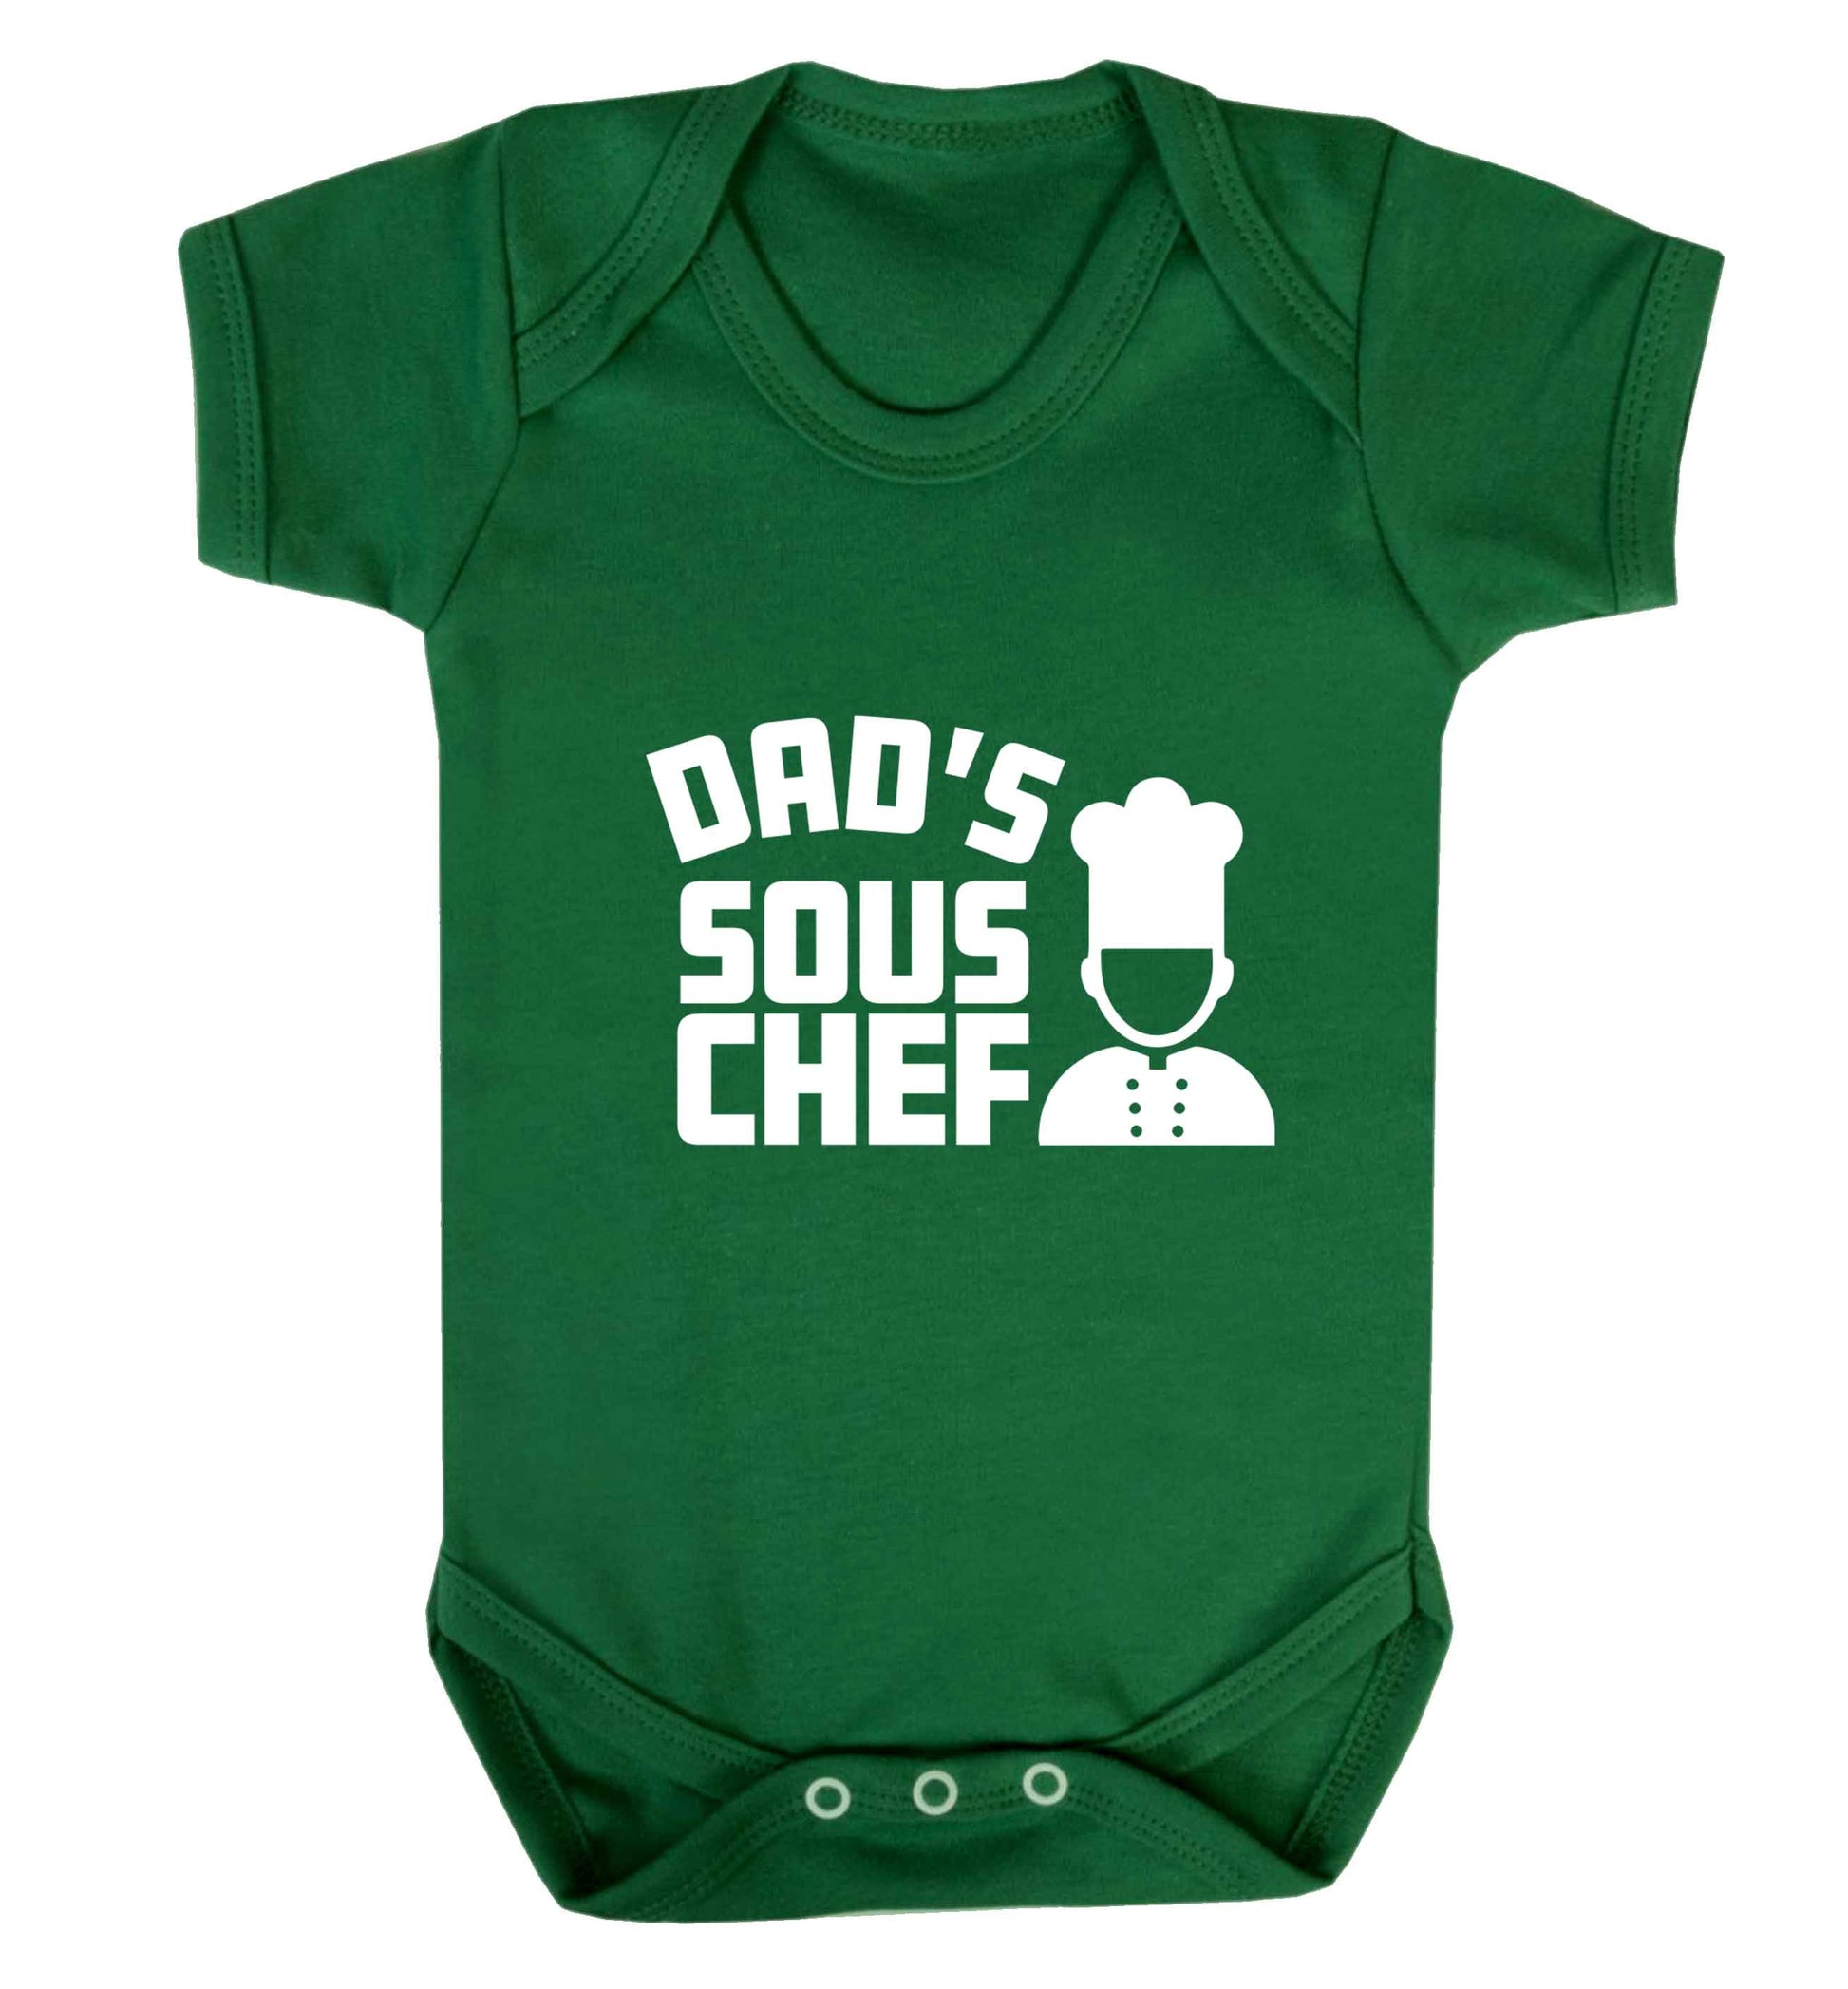 Dad's sous chef baby vest green 18-24 months